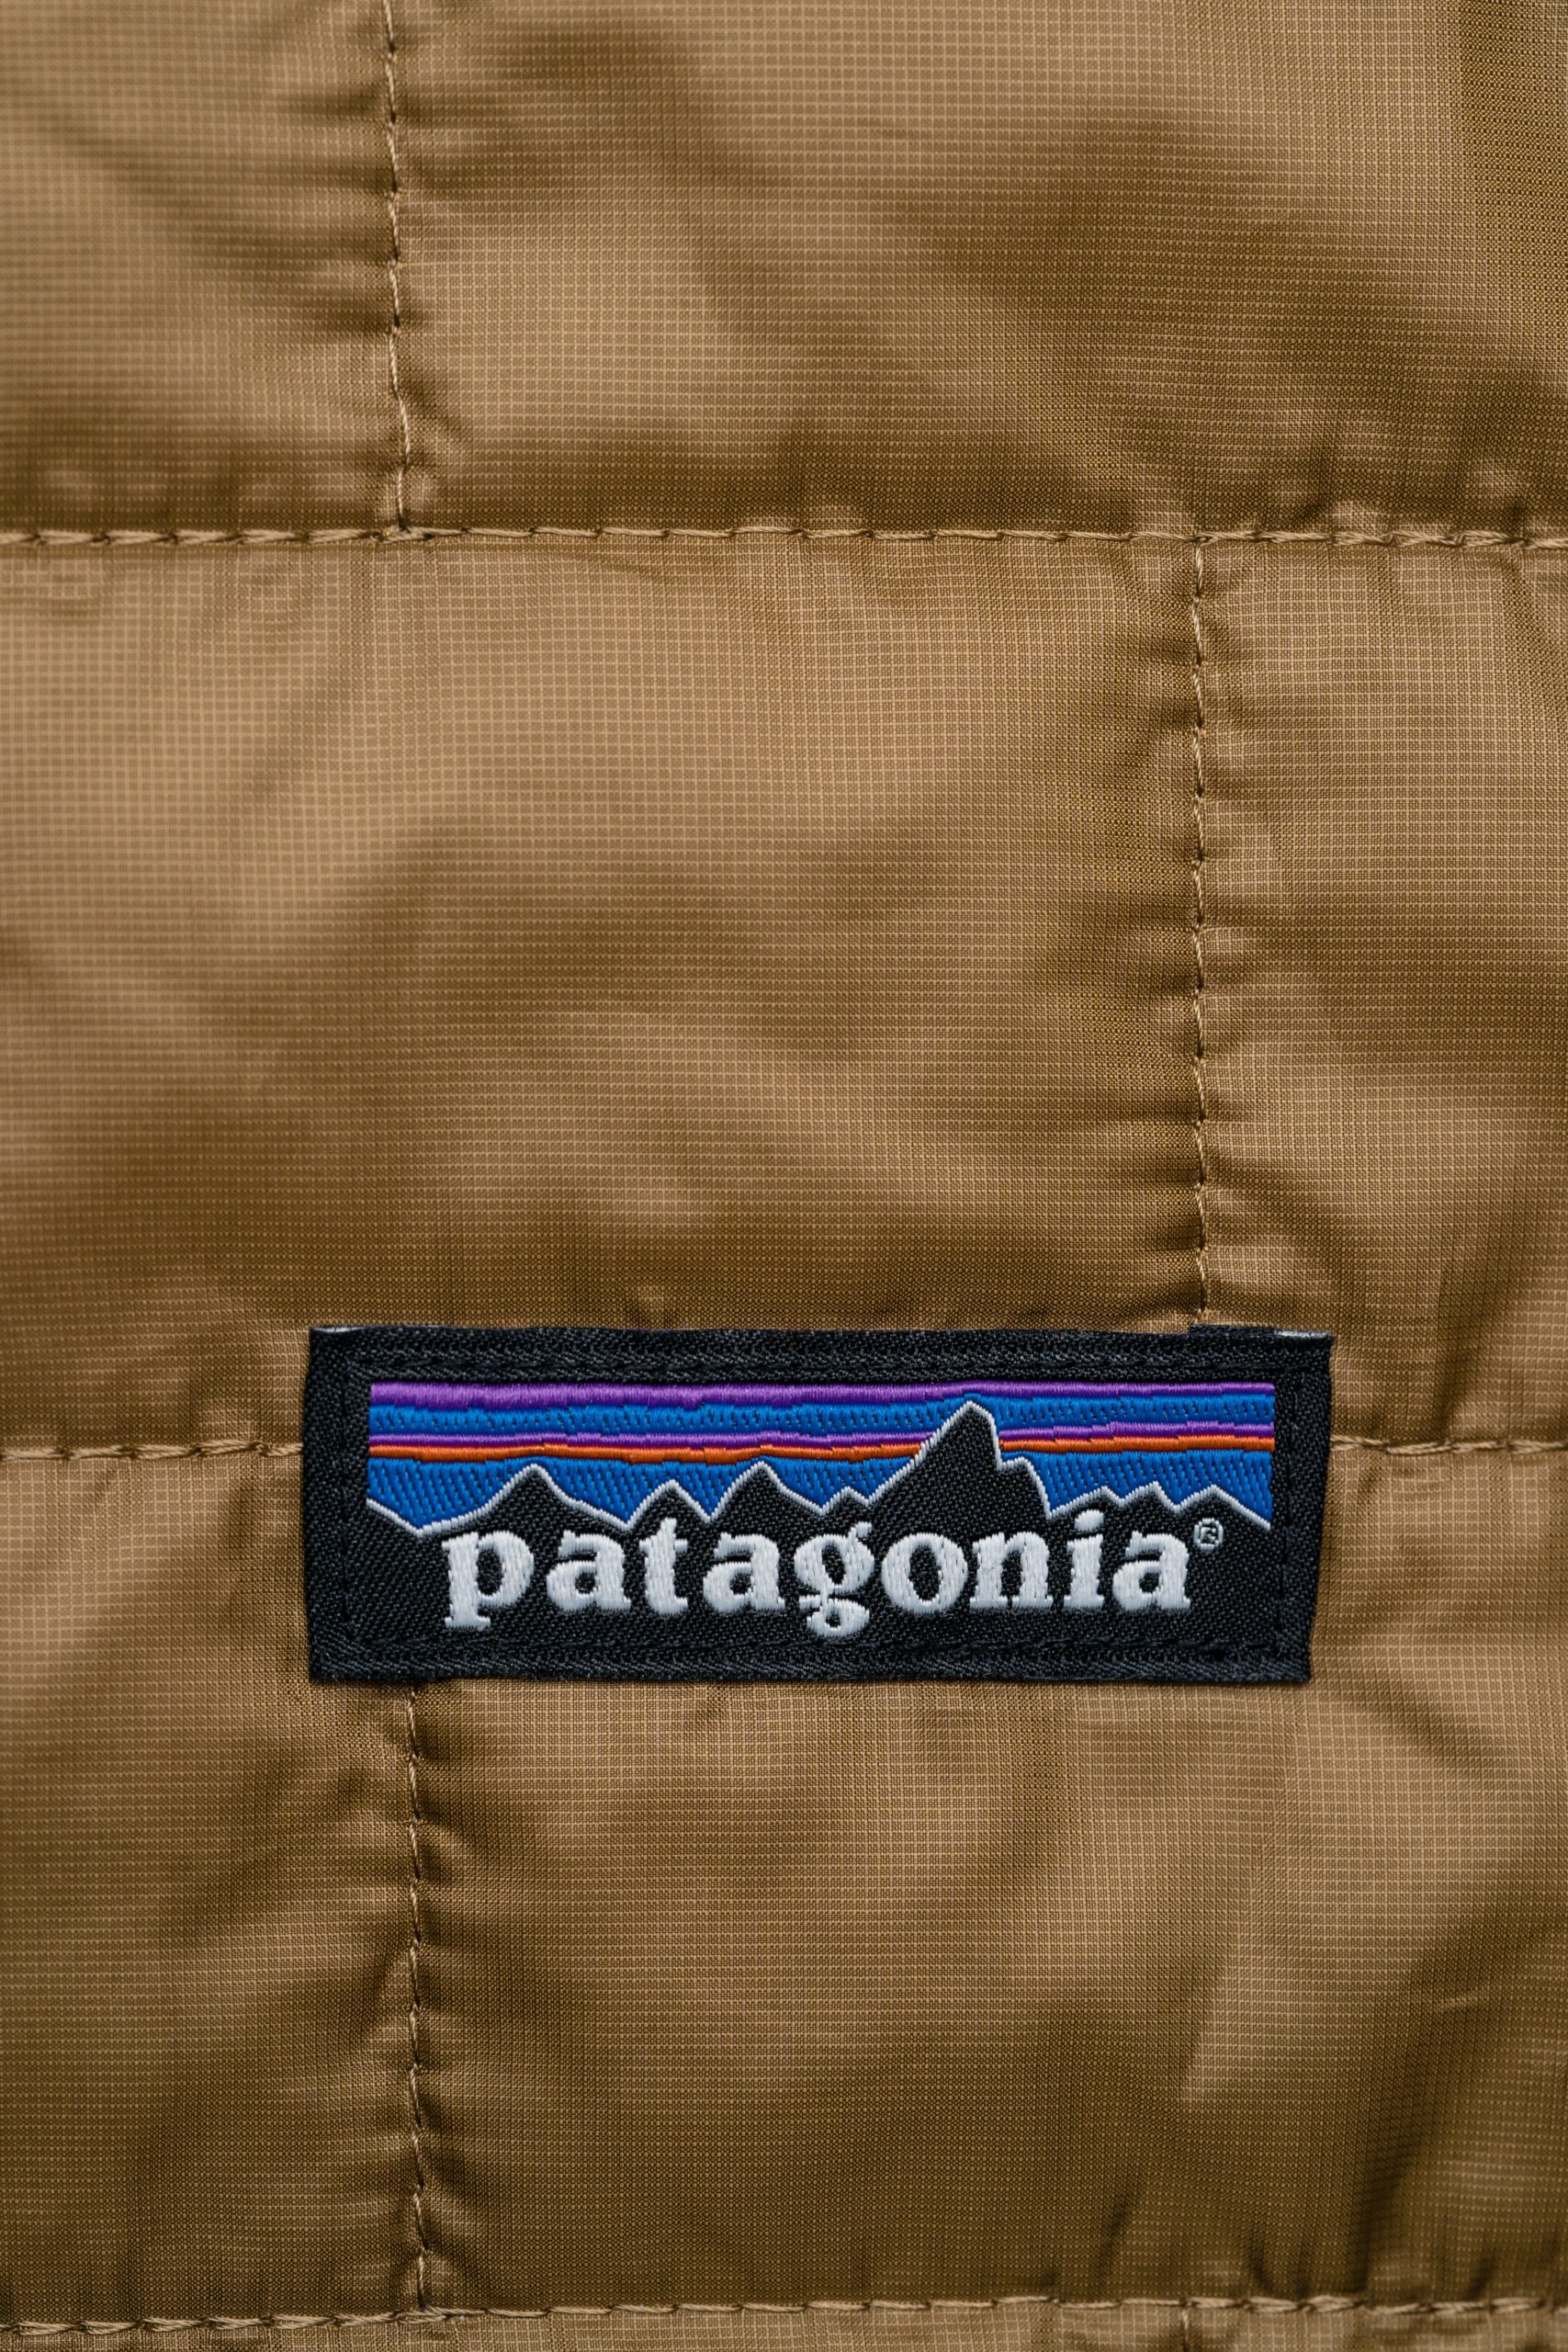 is patagonia worth it